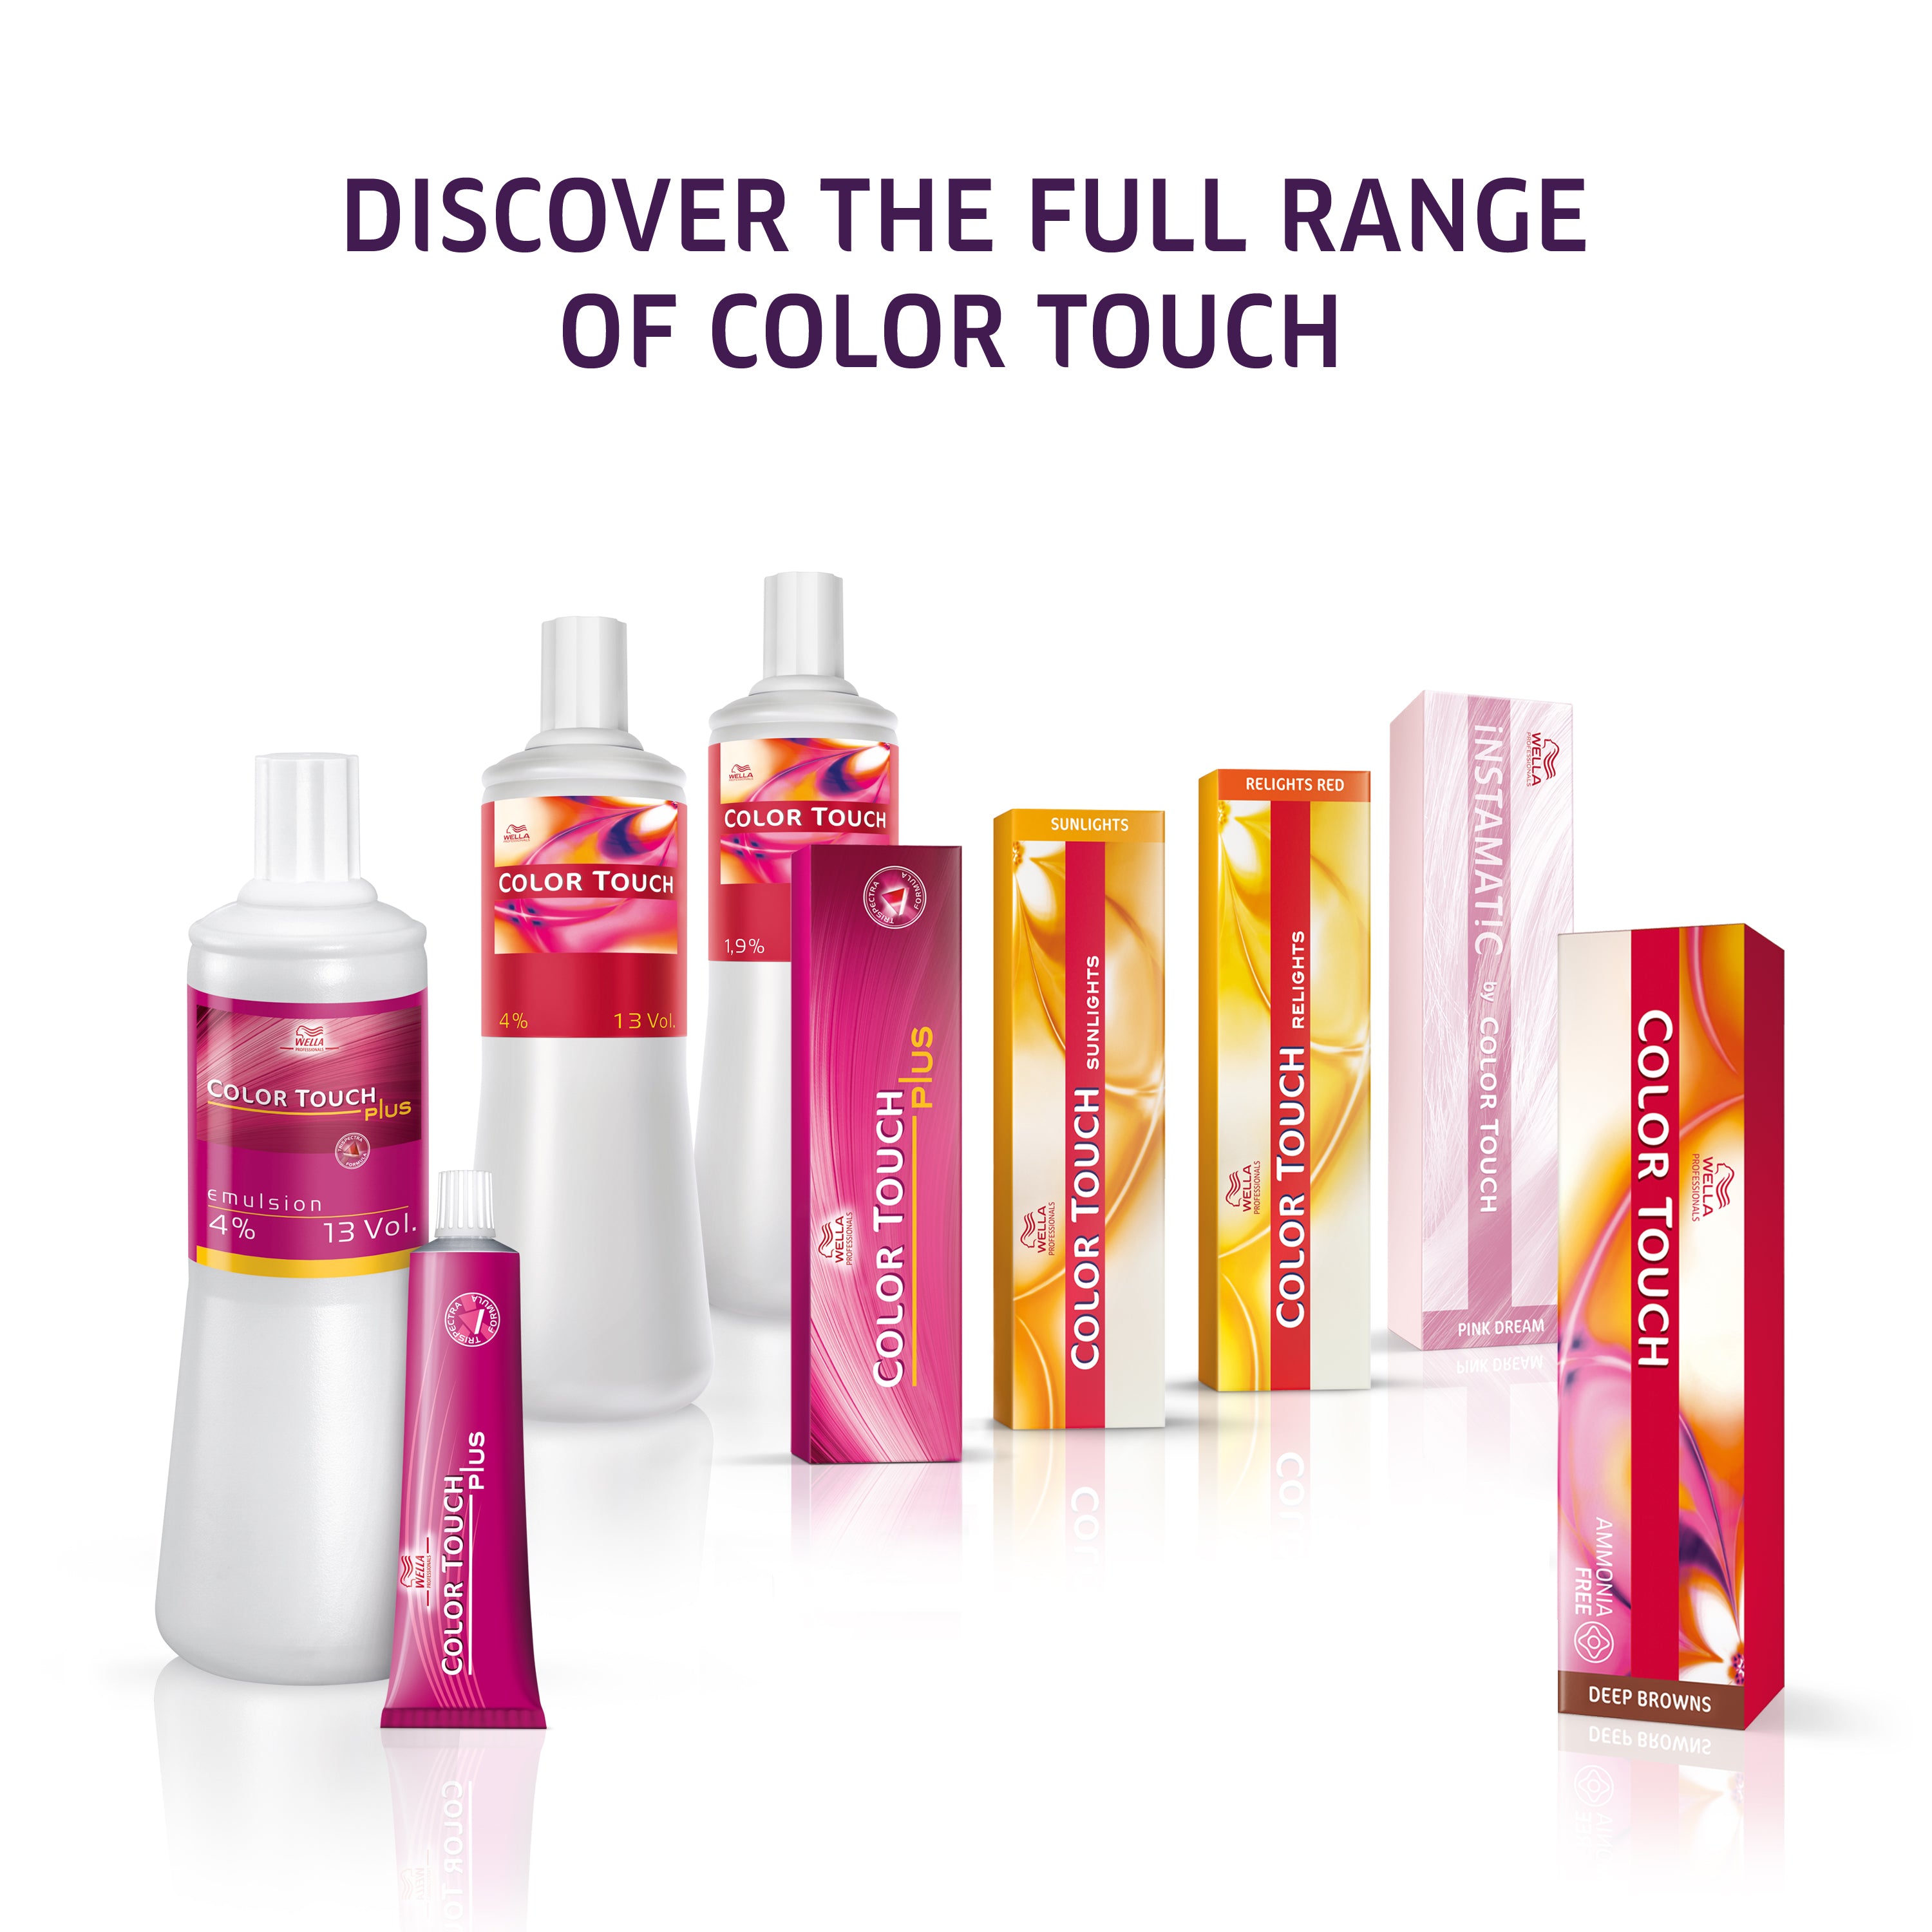 Wella Professional Color Touch Plus 44/05